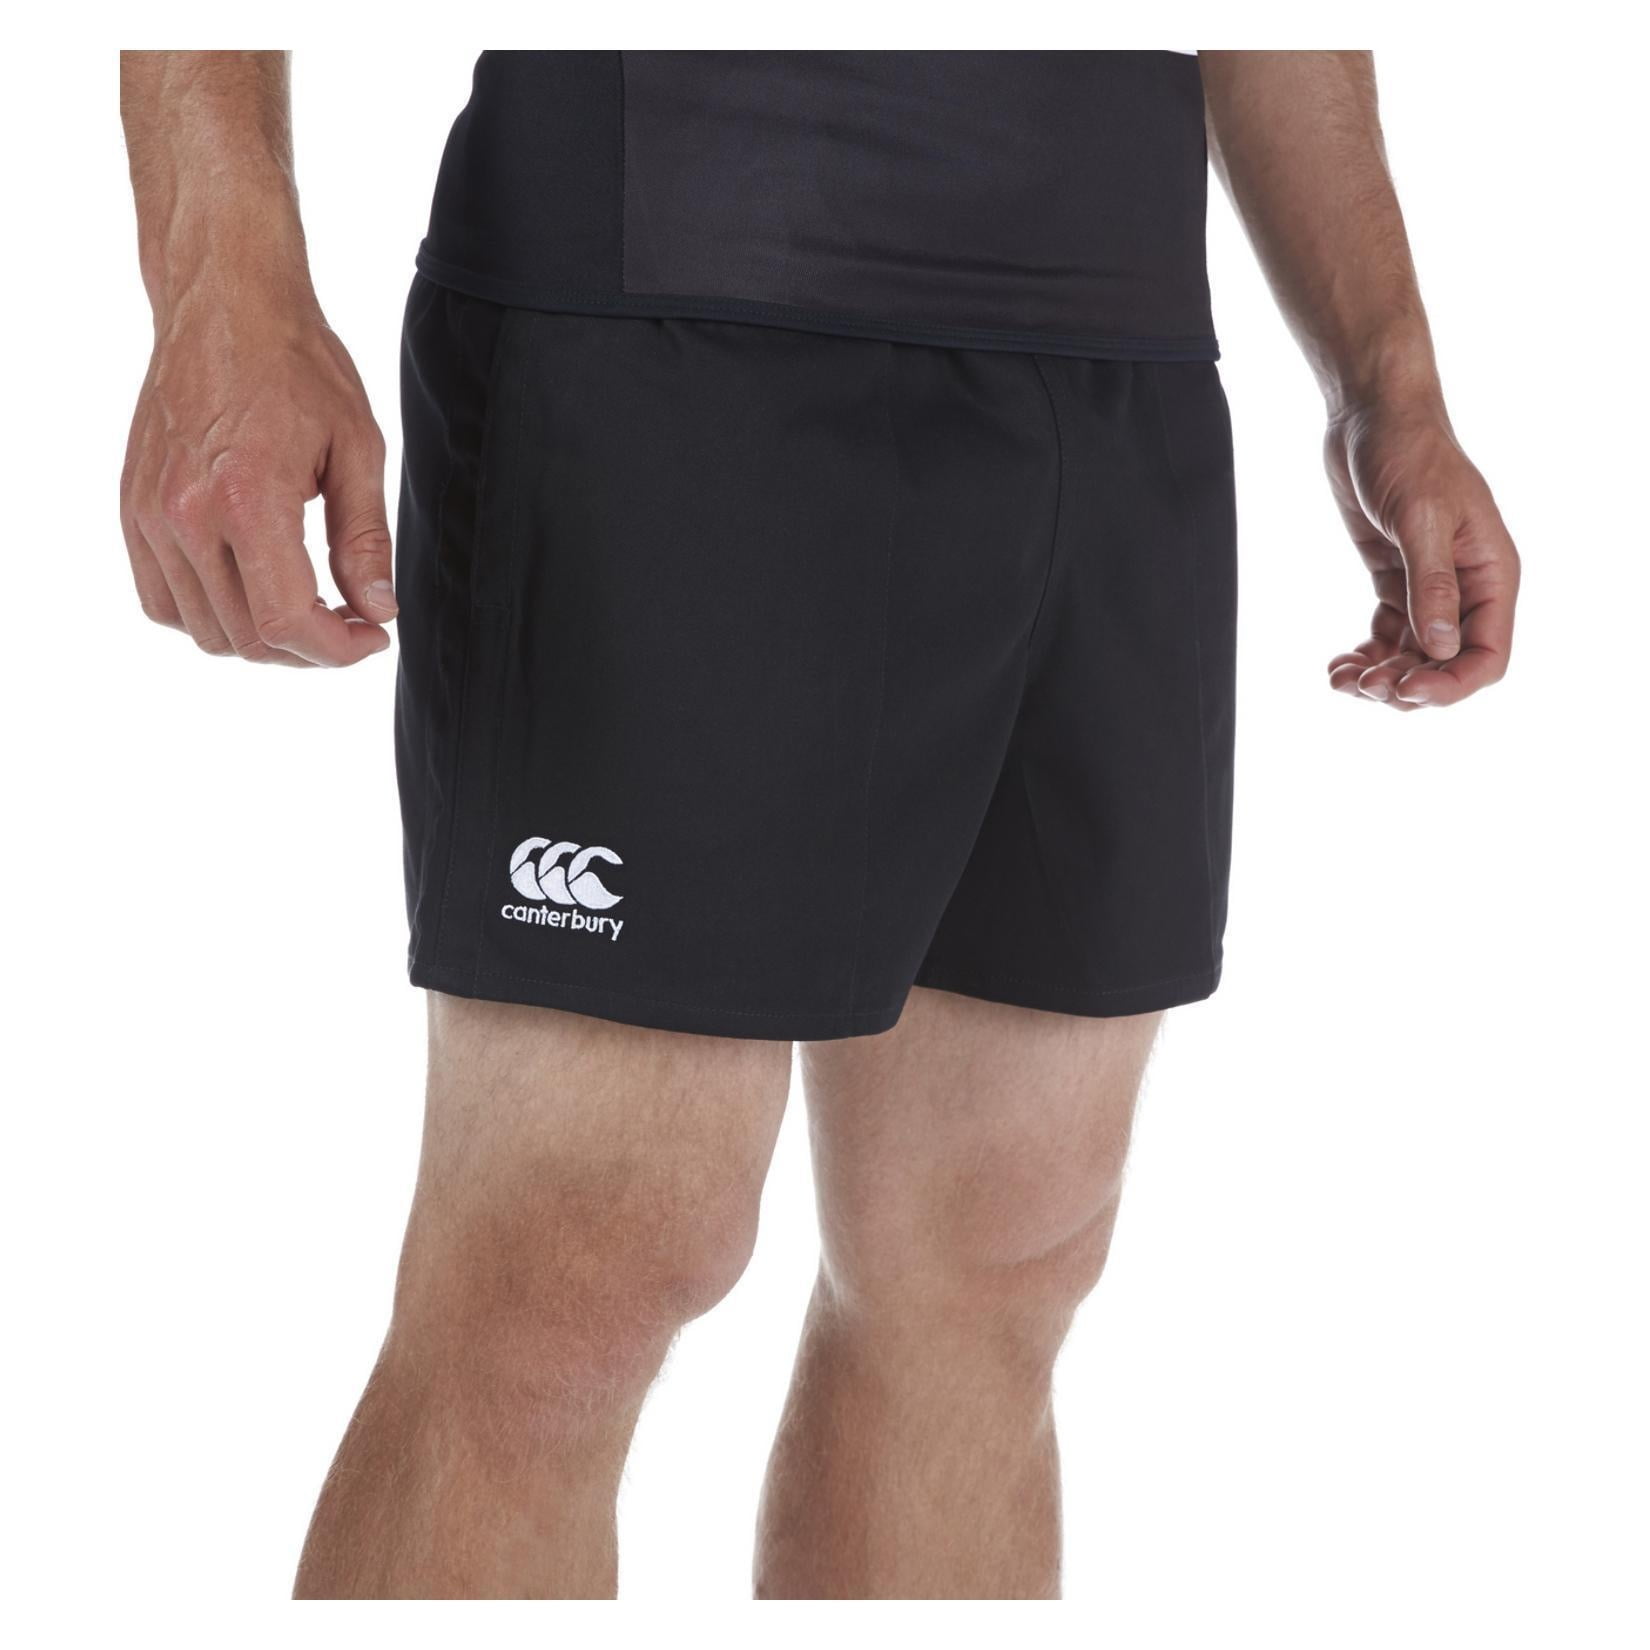 NEW Men's Canterbury Classic Cotton Professional Match Gym Sports Fitness Shorts 